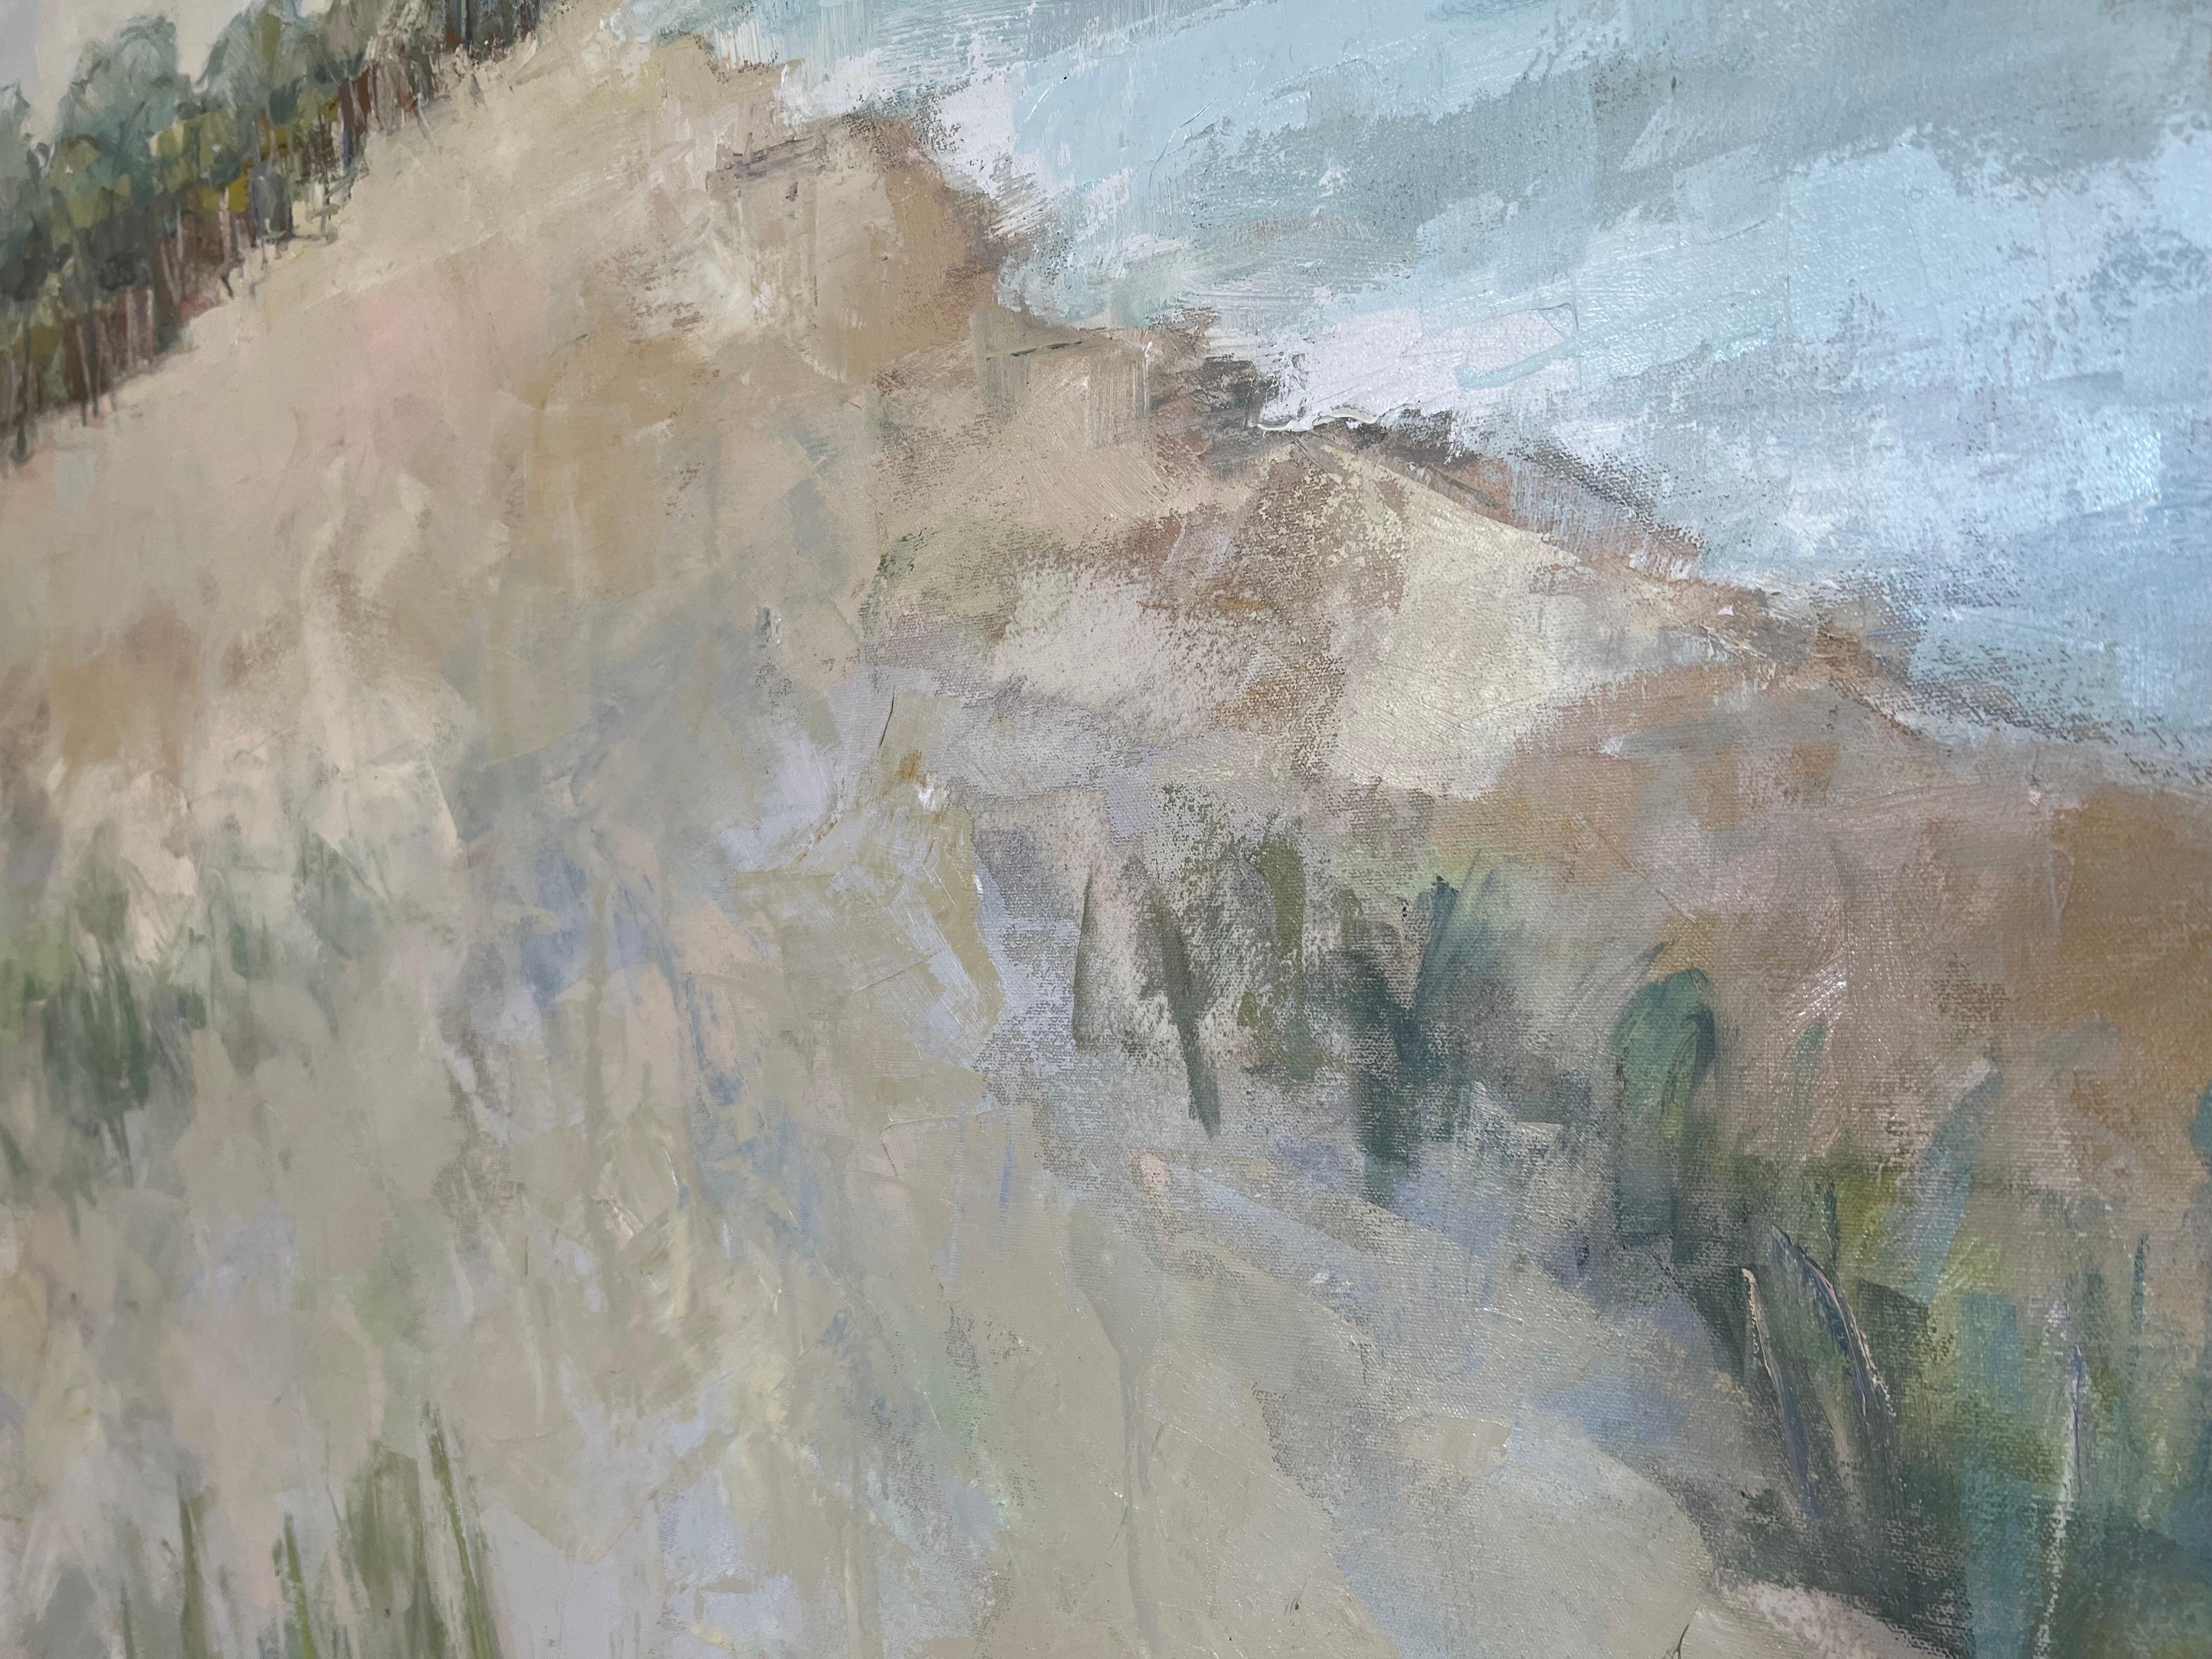 Coastal Vibes by Allison Chambers, Oil on Canvas Beach Landscape Painting 2